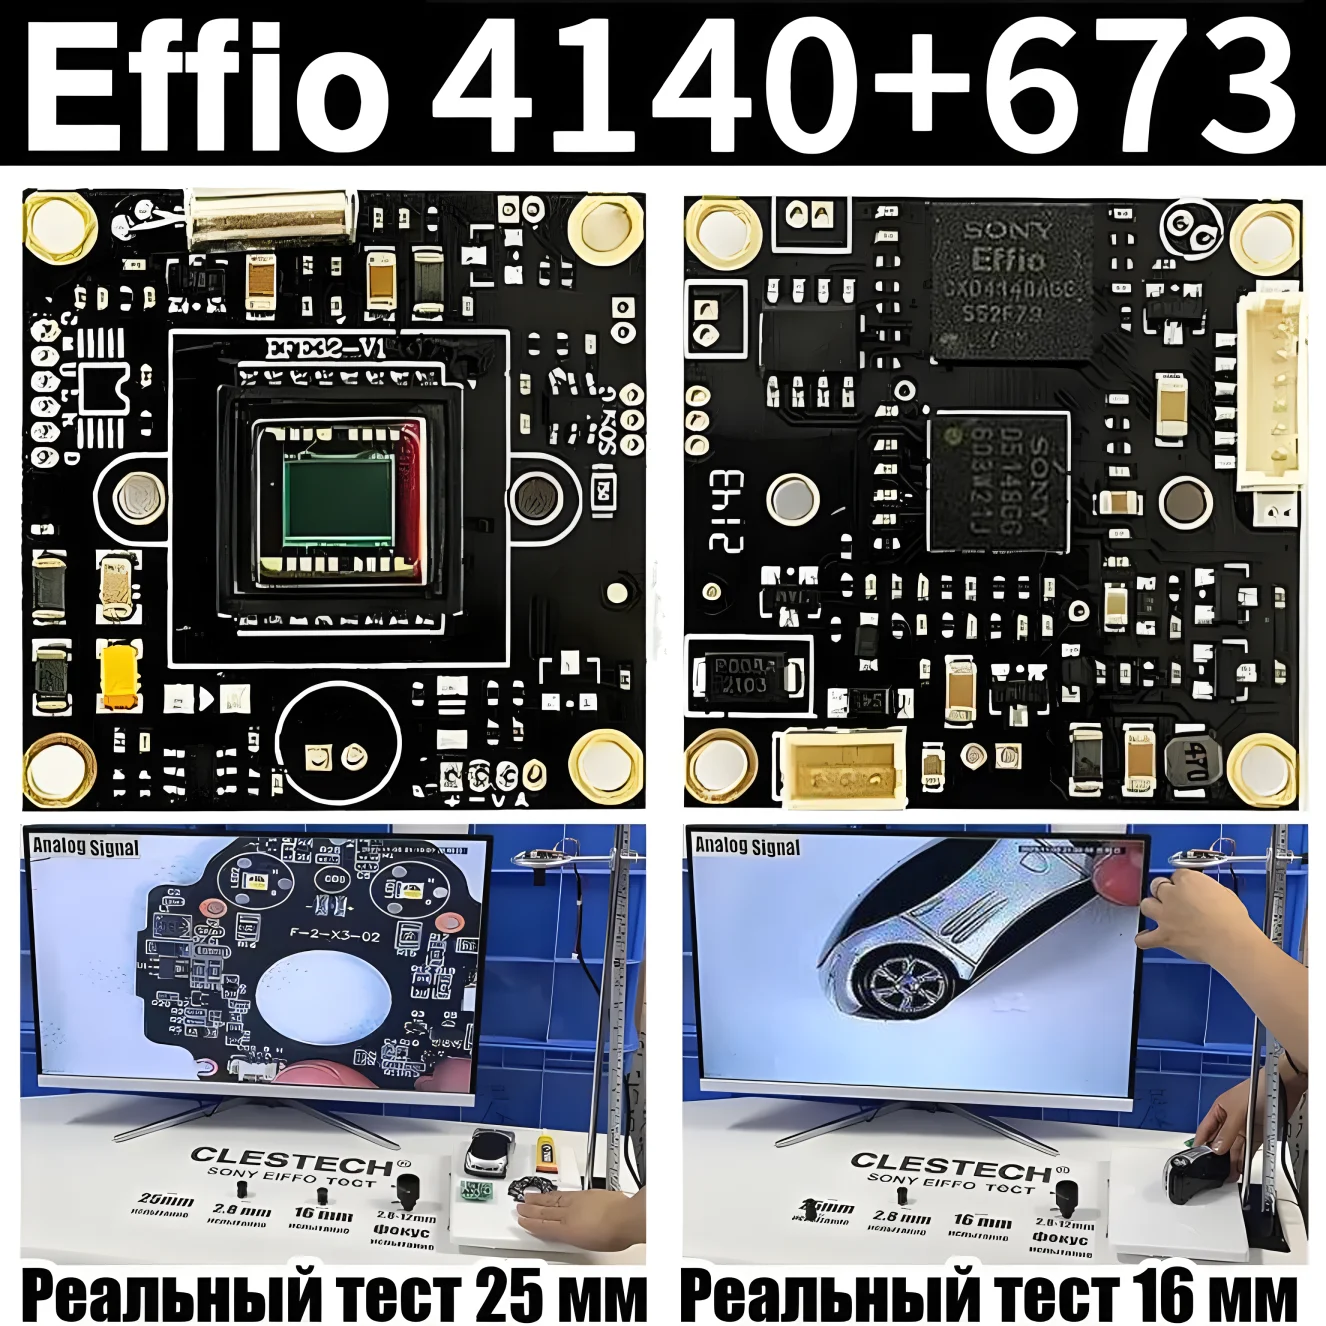 CLESTECH Camera Module Sony Effio CCD 4140+673 800TVL Chip Circuit Board HD CCTV Analog 960H OSD Cable Microscope DIY Monitoring redeagle 1200tvl cmos color analog video security camera module cctv pcb board with hd 3 6mm lens